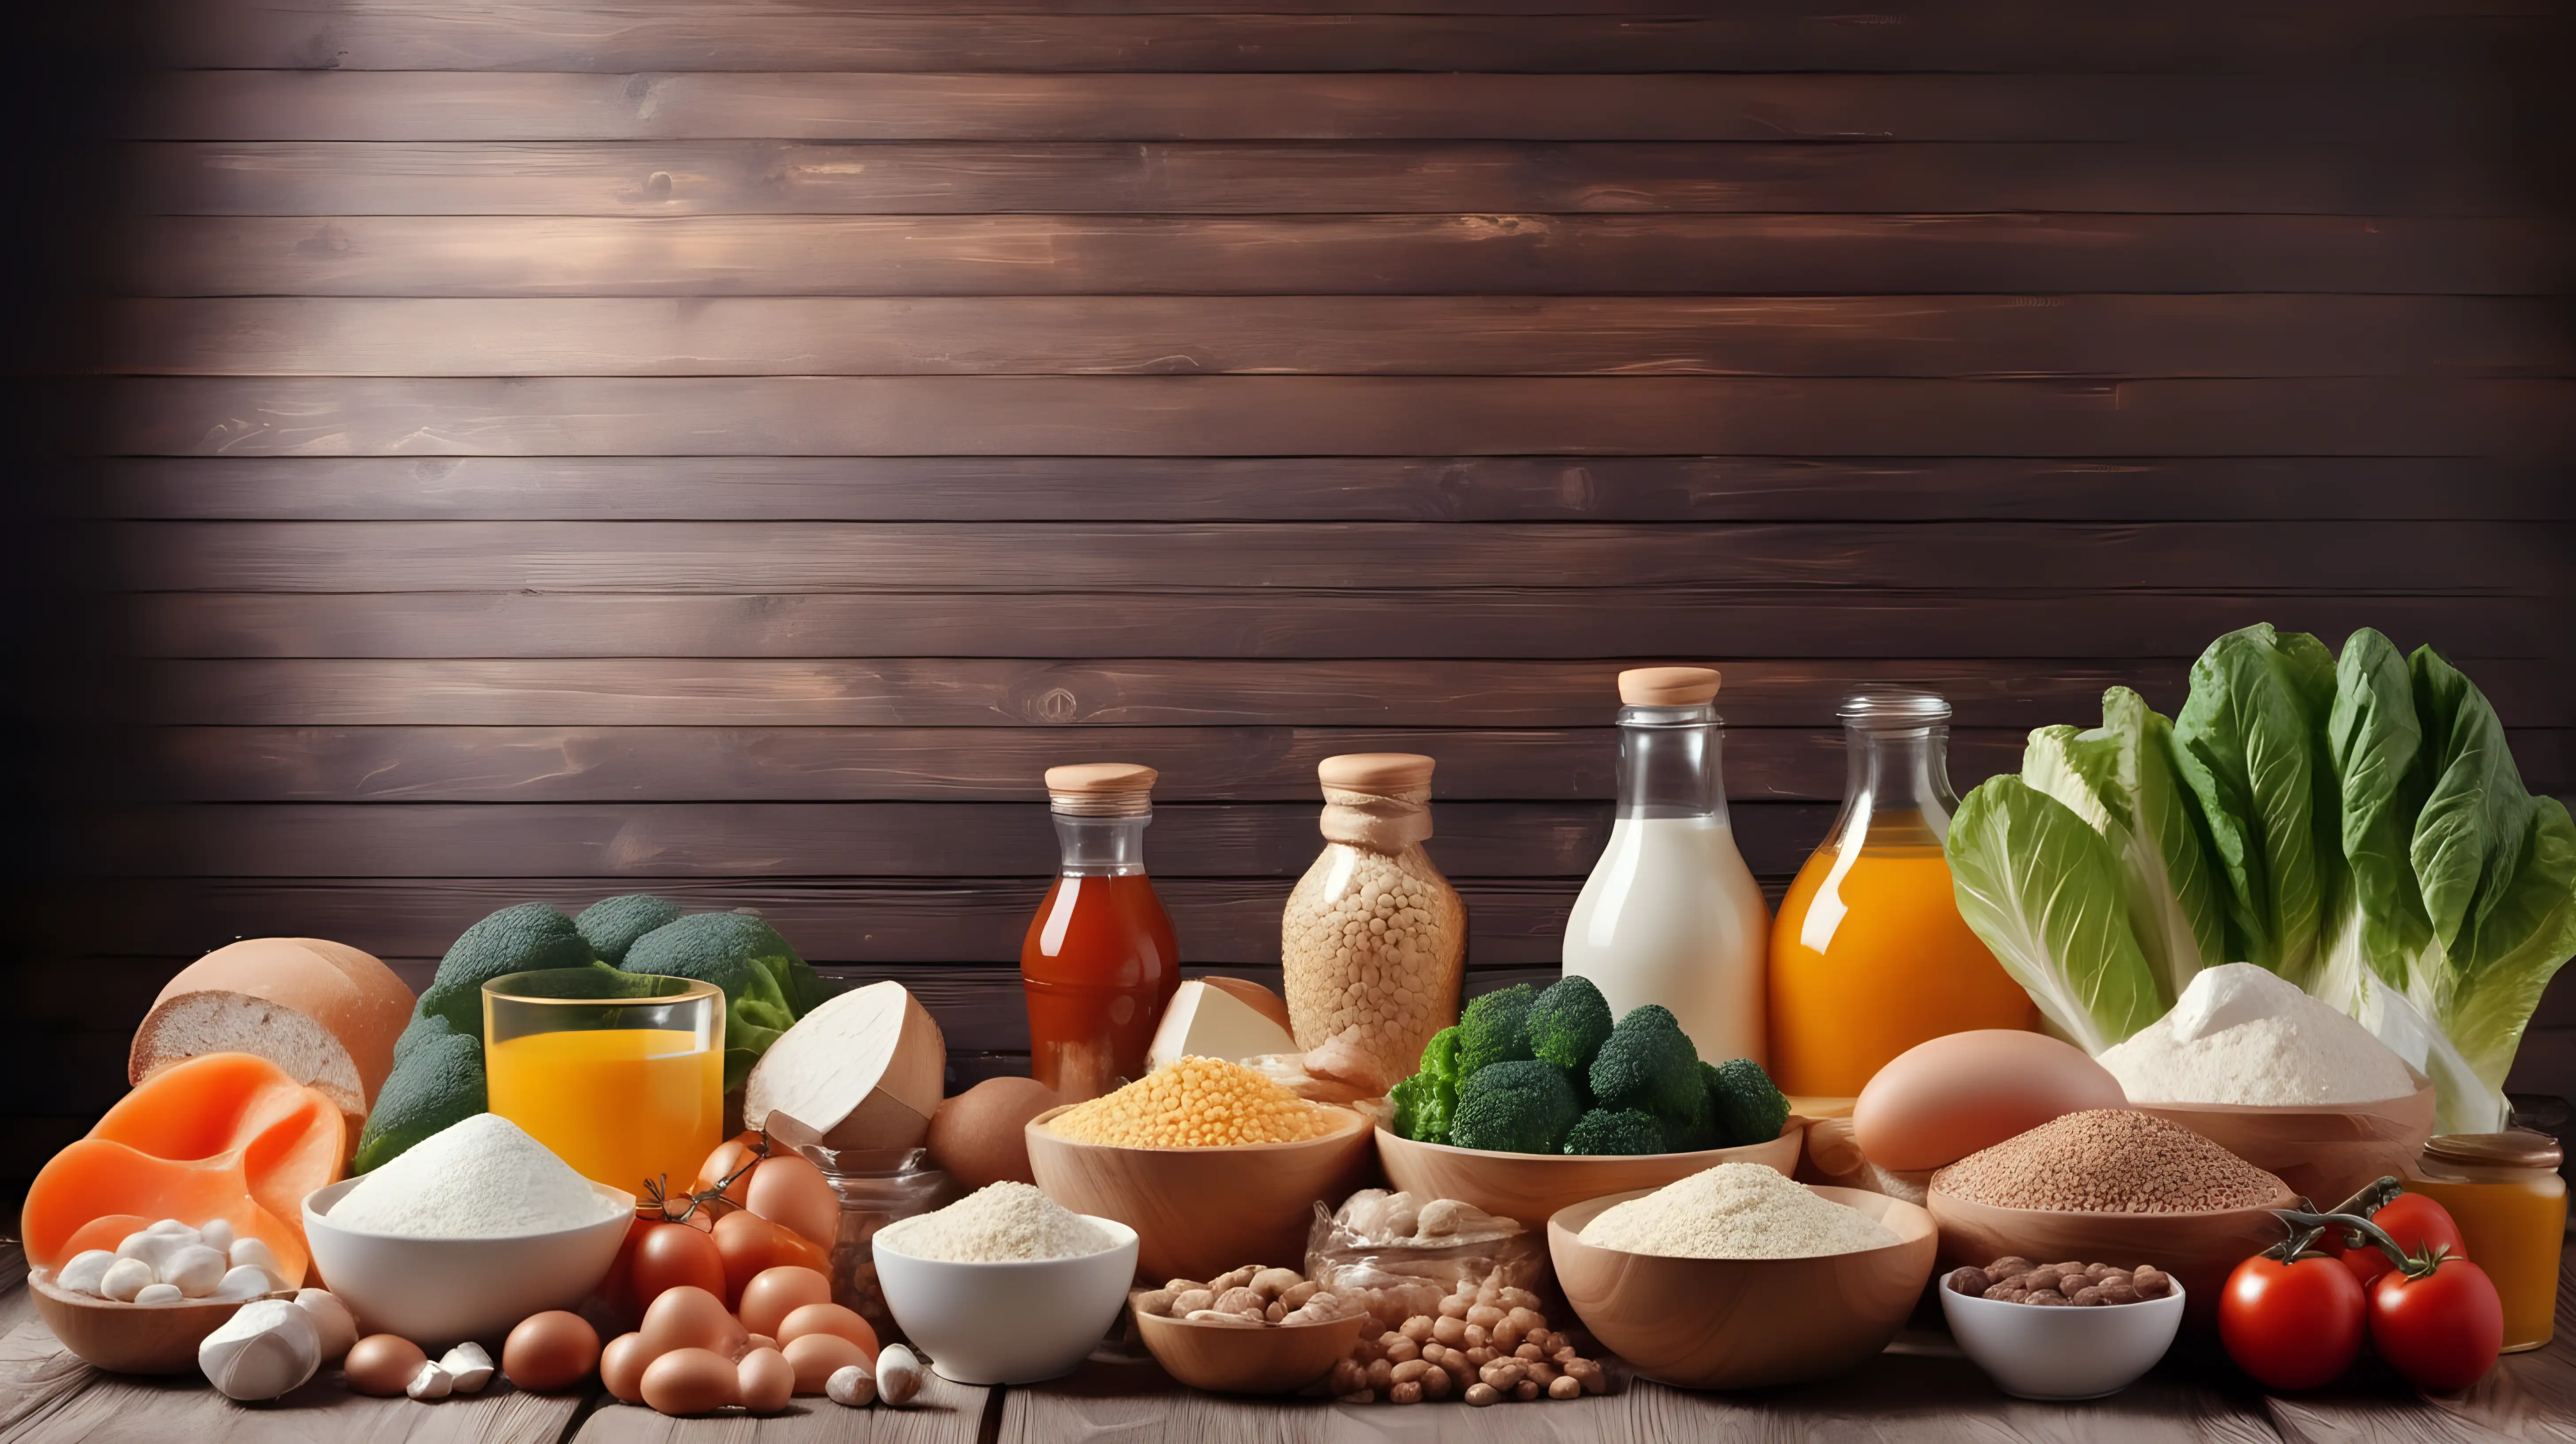 Composition with food products, ingredients of healthy diet, wooden background, copy space, photo shoot